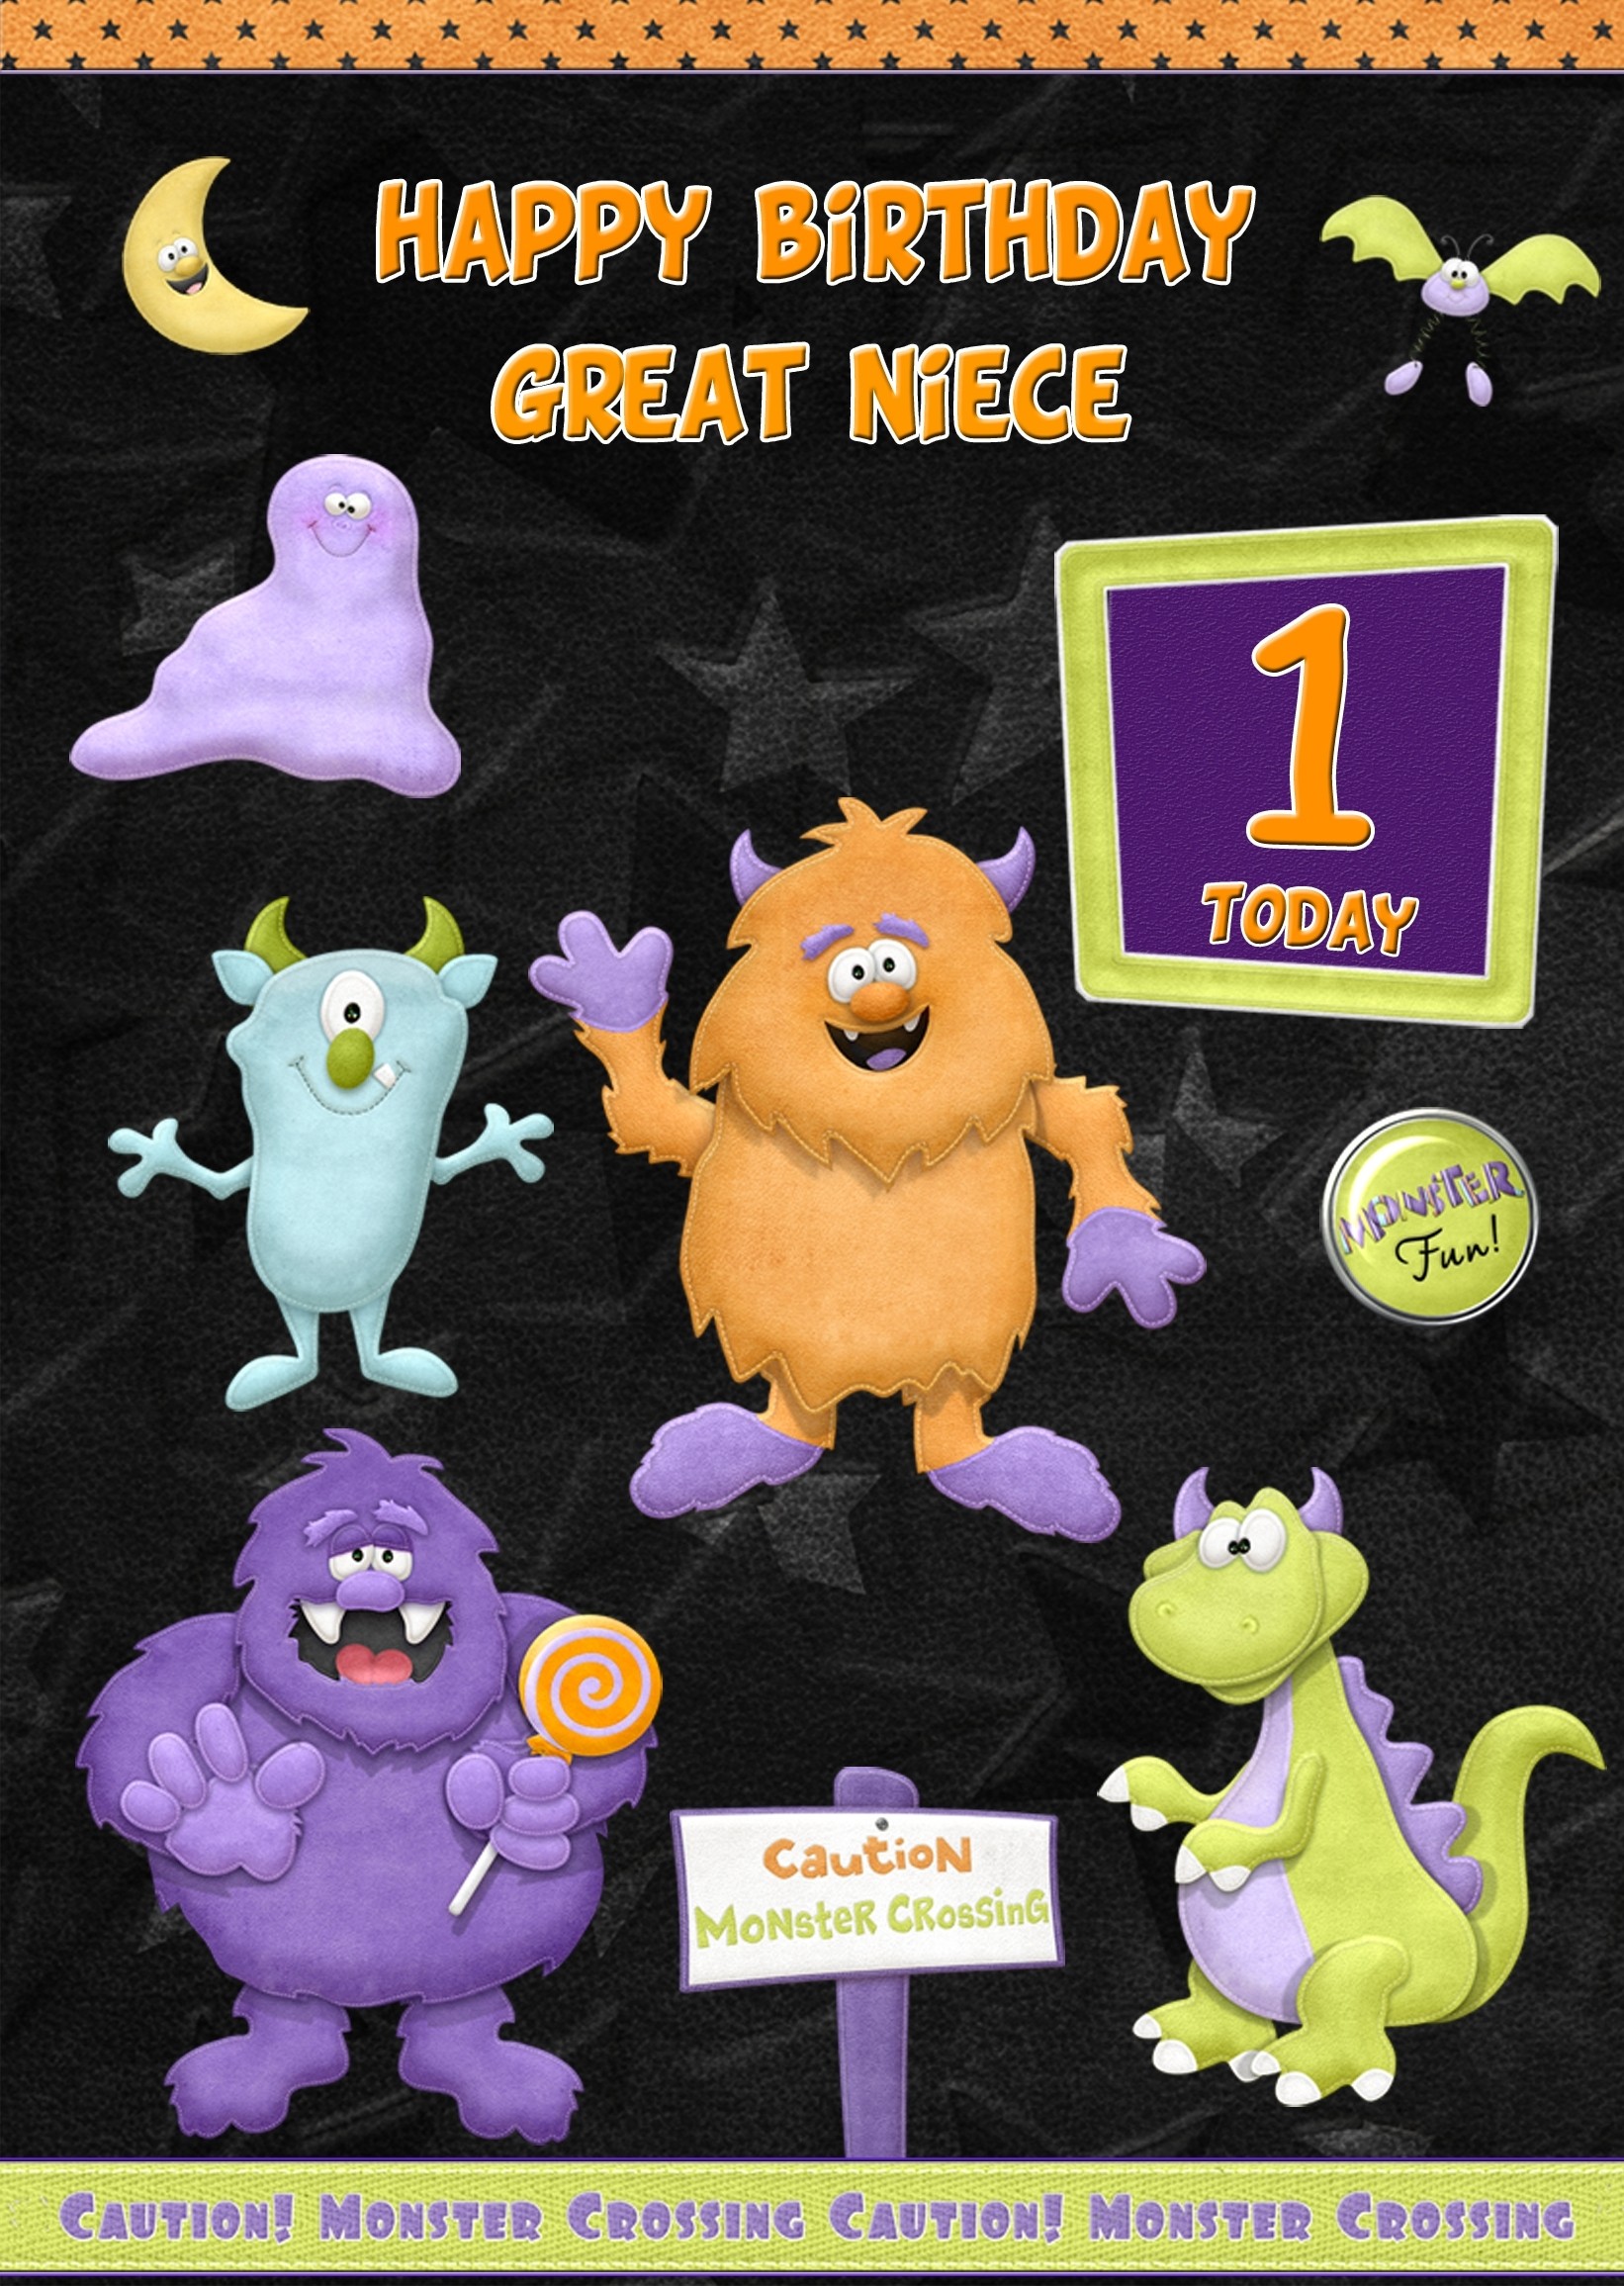 Kids 1st Birthday Funny Monster Cartoon Card for Great Niece